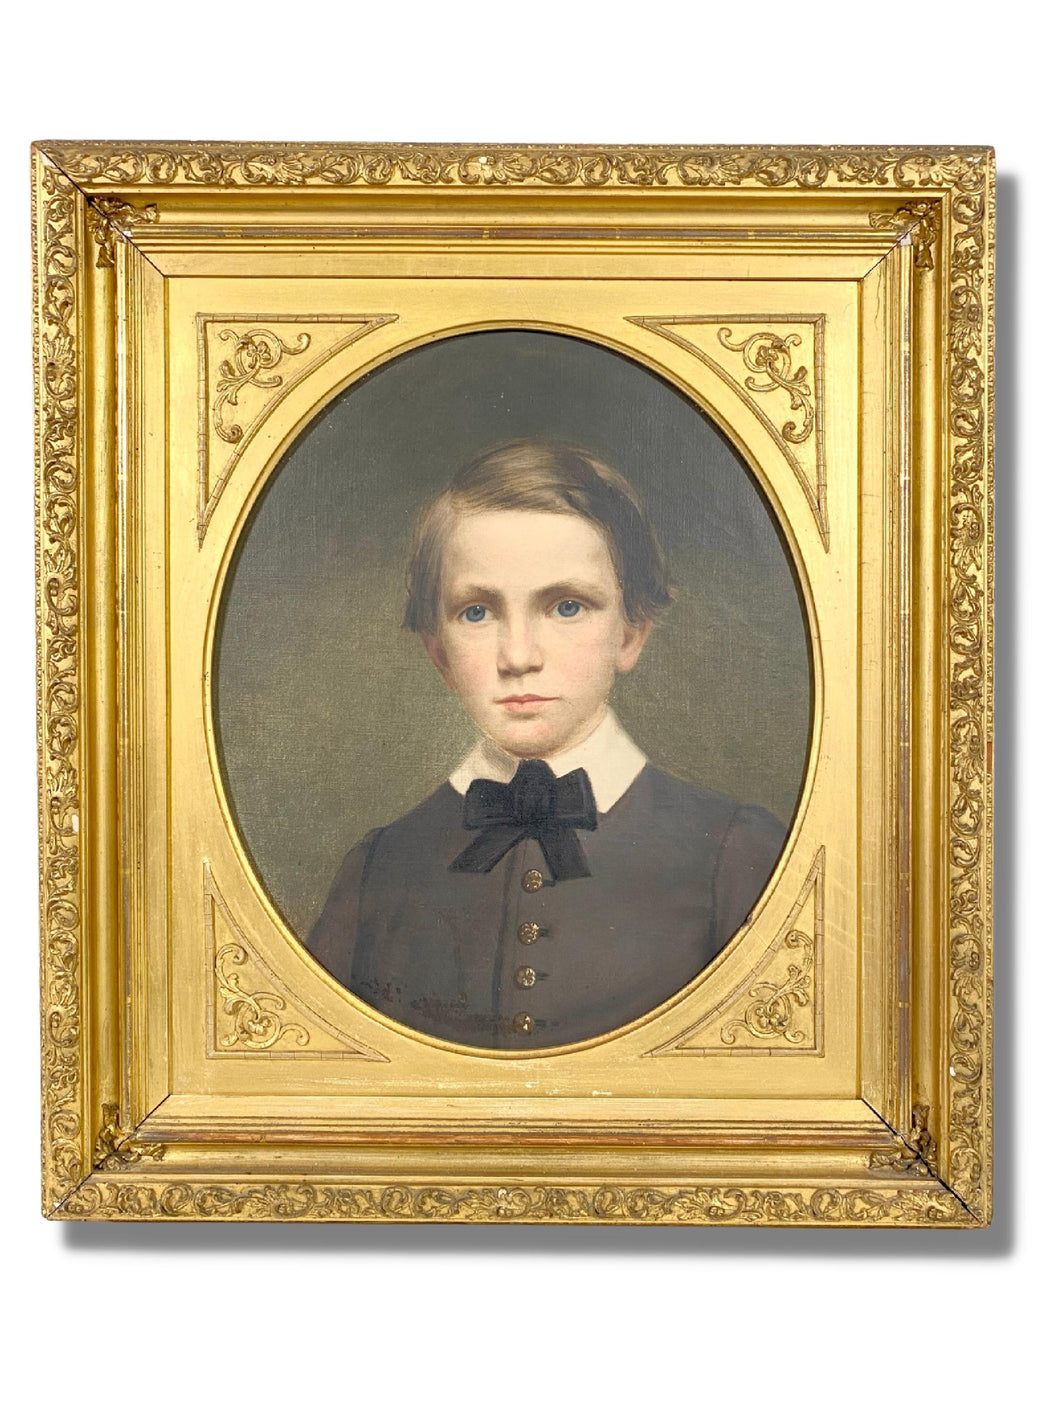 Oil painting of Young Boy